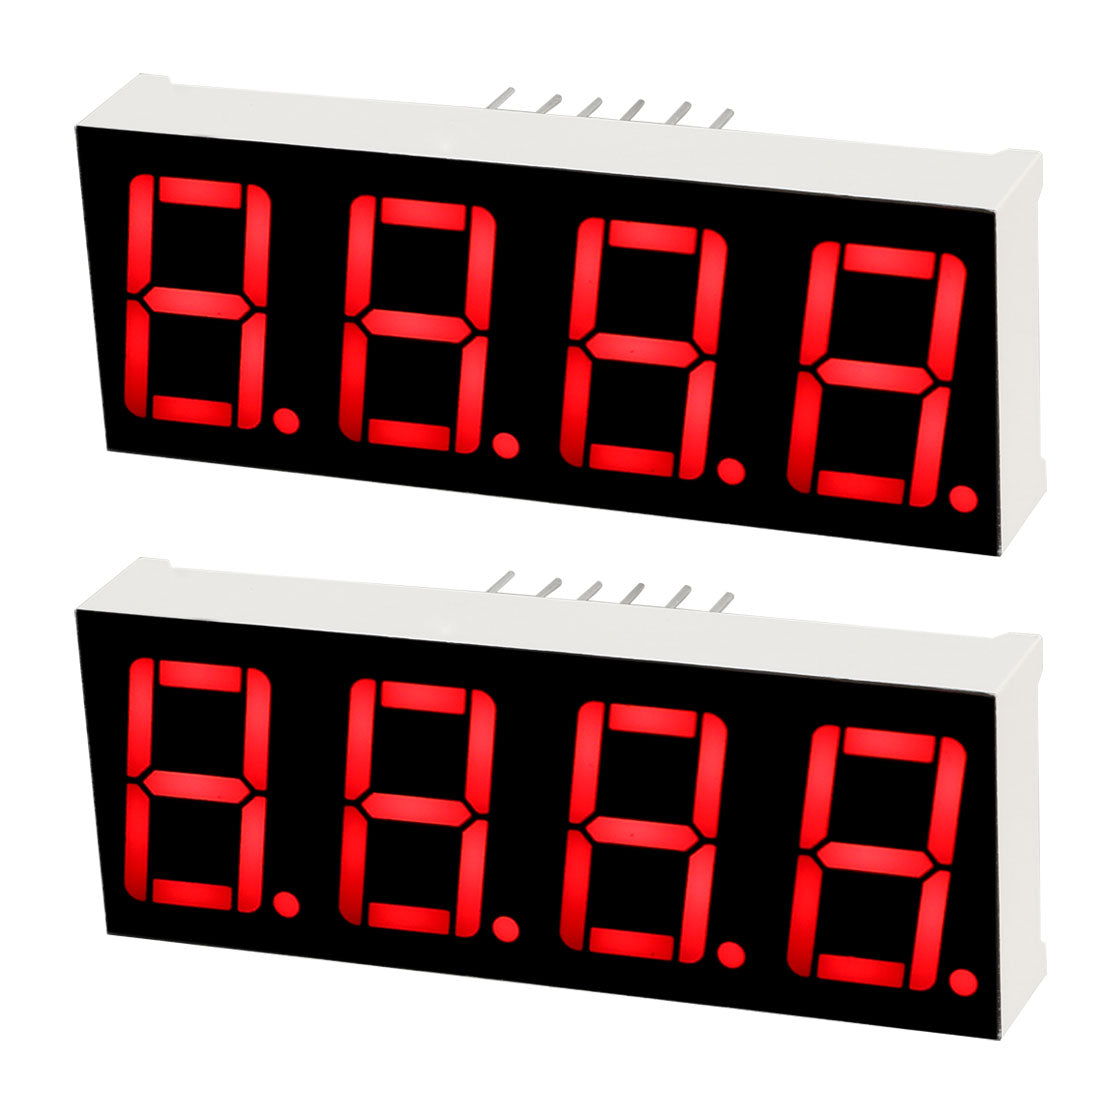 uxcell Uxcell Common Cathode 12Pin 4 Bit 7 Segment 1.98 x 0.75 x 0.31 Inch 0.55" Red LED Display Digital Tube 2pcs